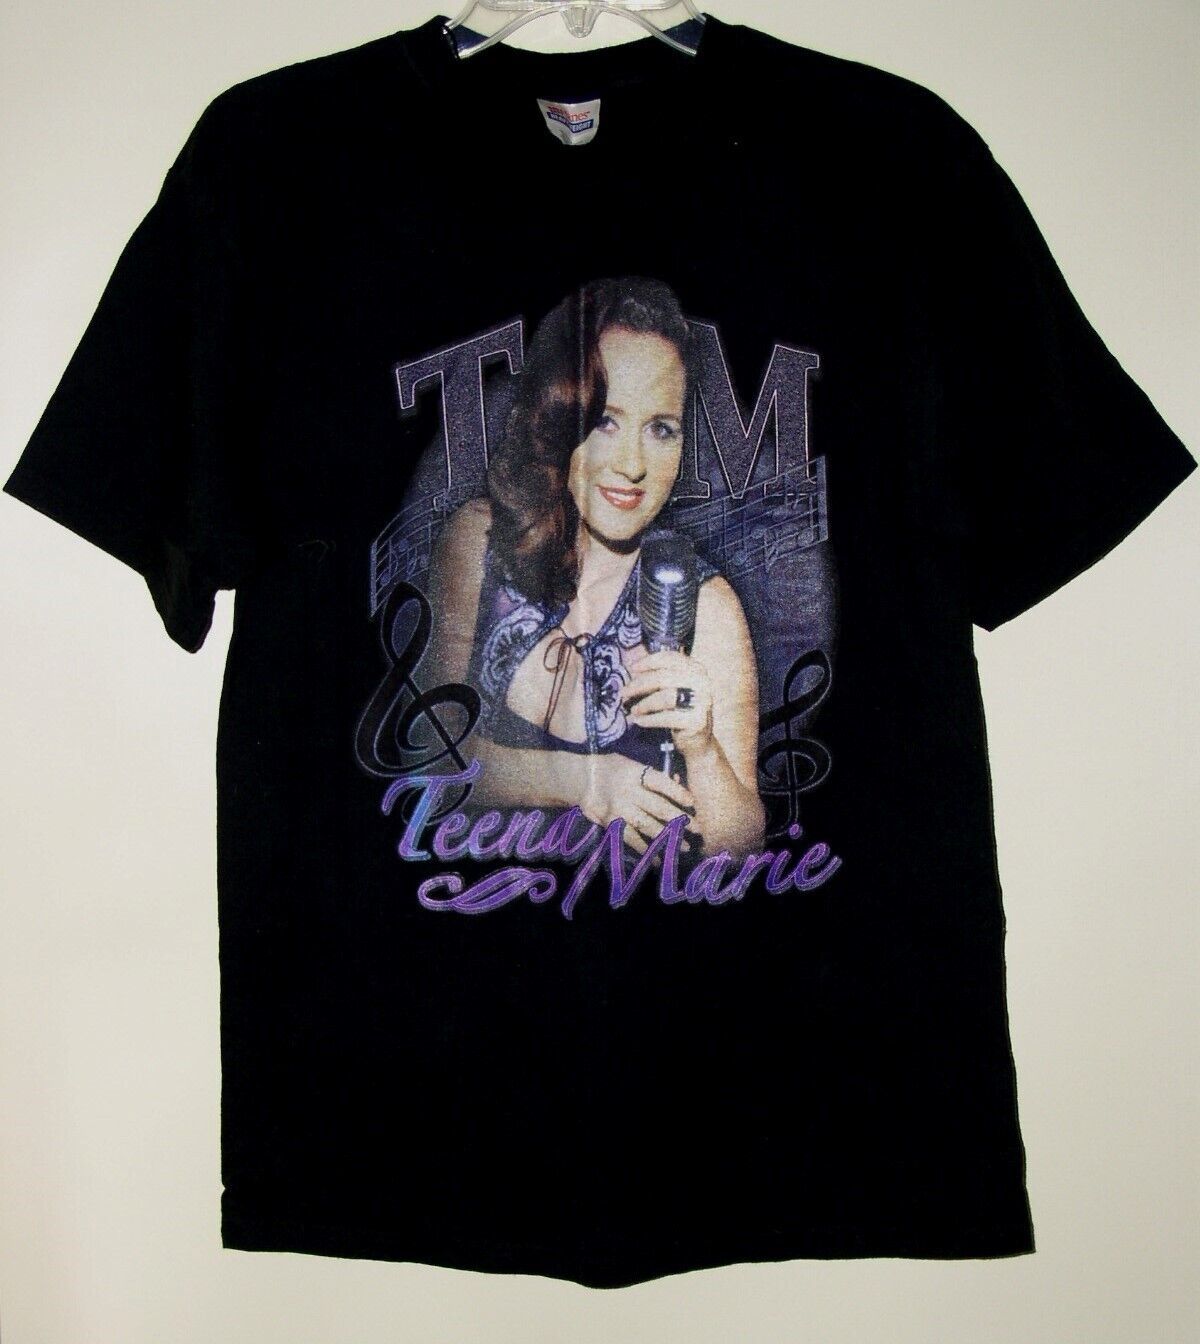 Primary image for Teena Marie Concert Tour T Shirt Vintage Size Medium